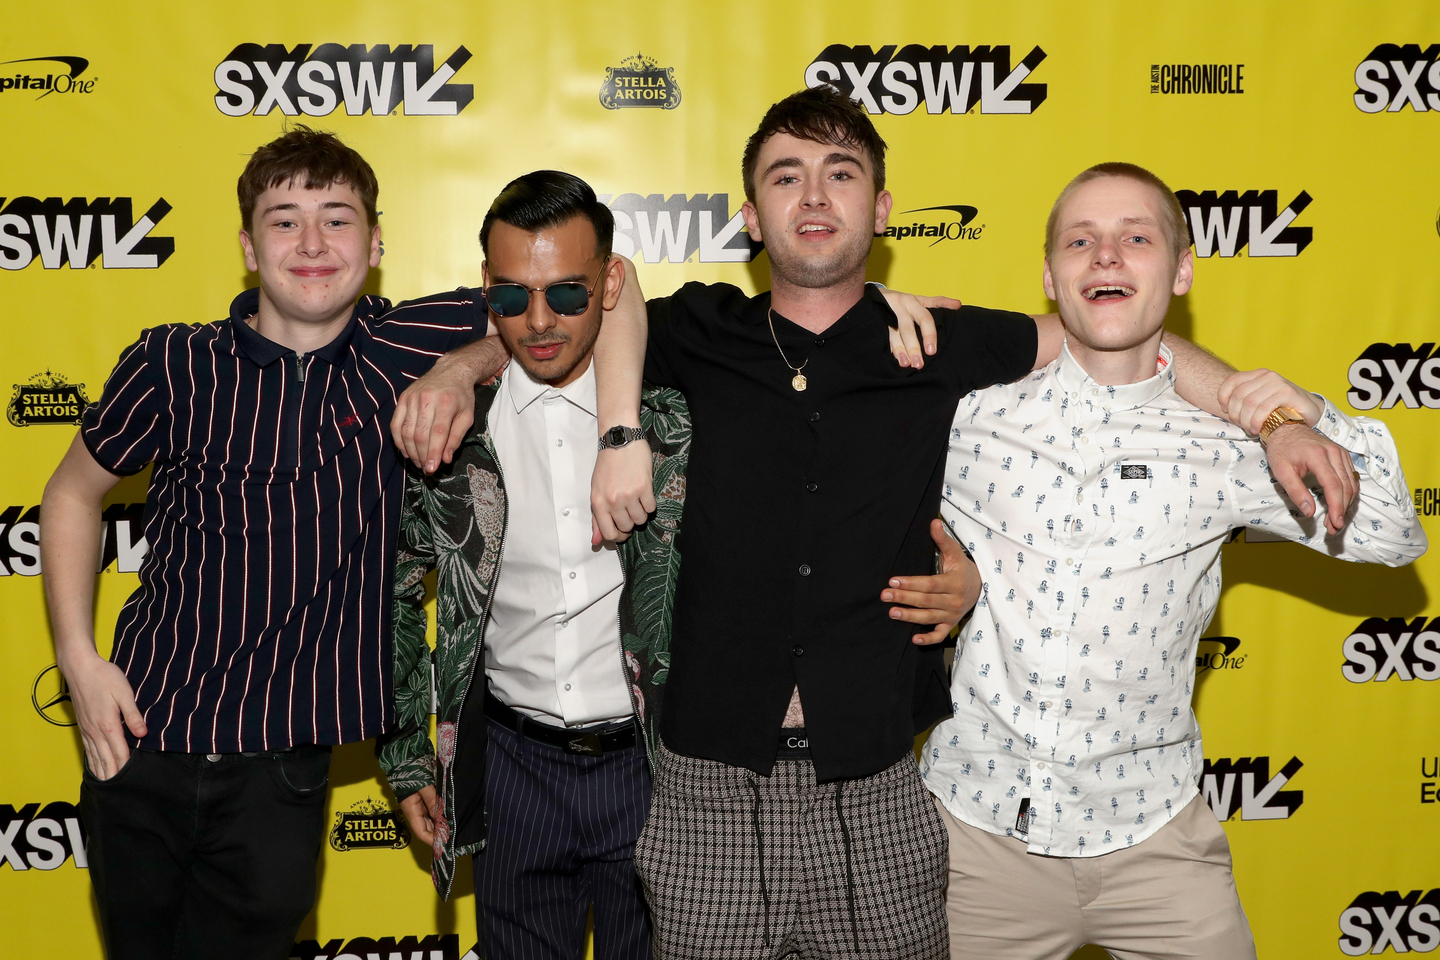 (L-R) Samuel Bottomley, Viraj Juneja, Rian Gordon, and Lewis Gribben attend the Boyz In The Wood world premiere. Photo by Hutton Supancic/Getty Images for SXSW